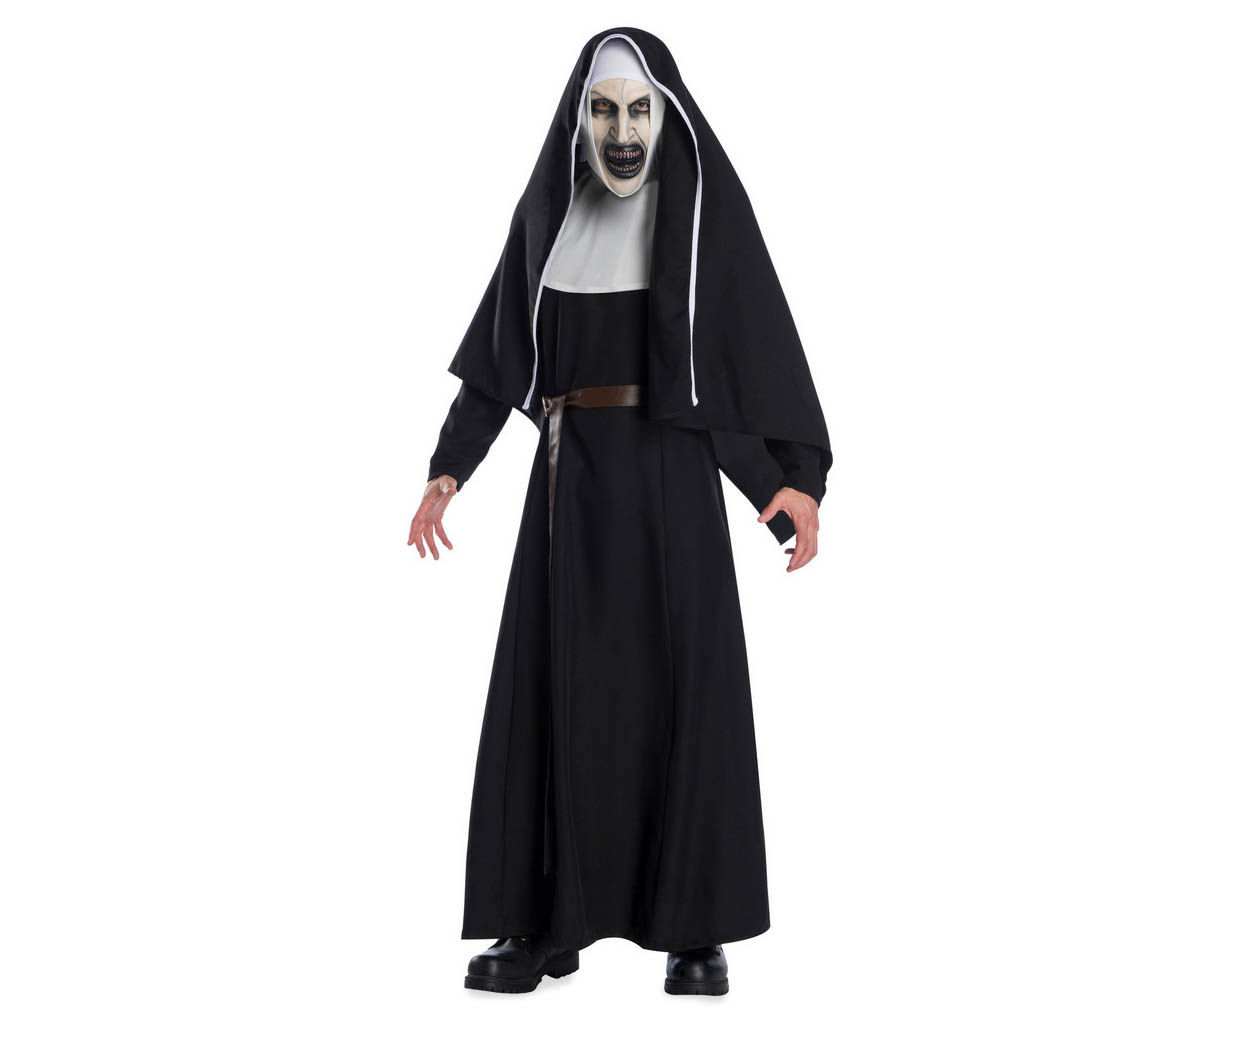 Adult Size Standard Deluxe The Nun Costume